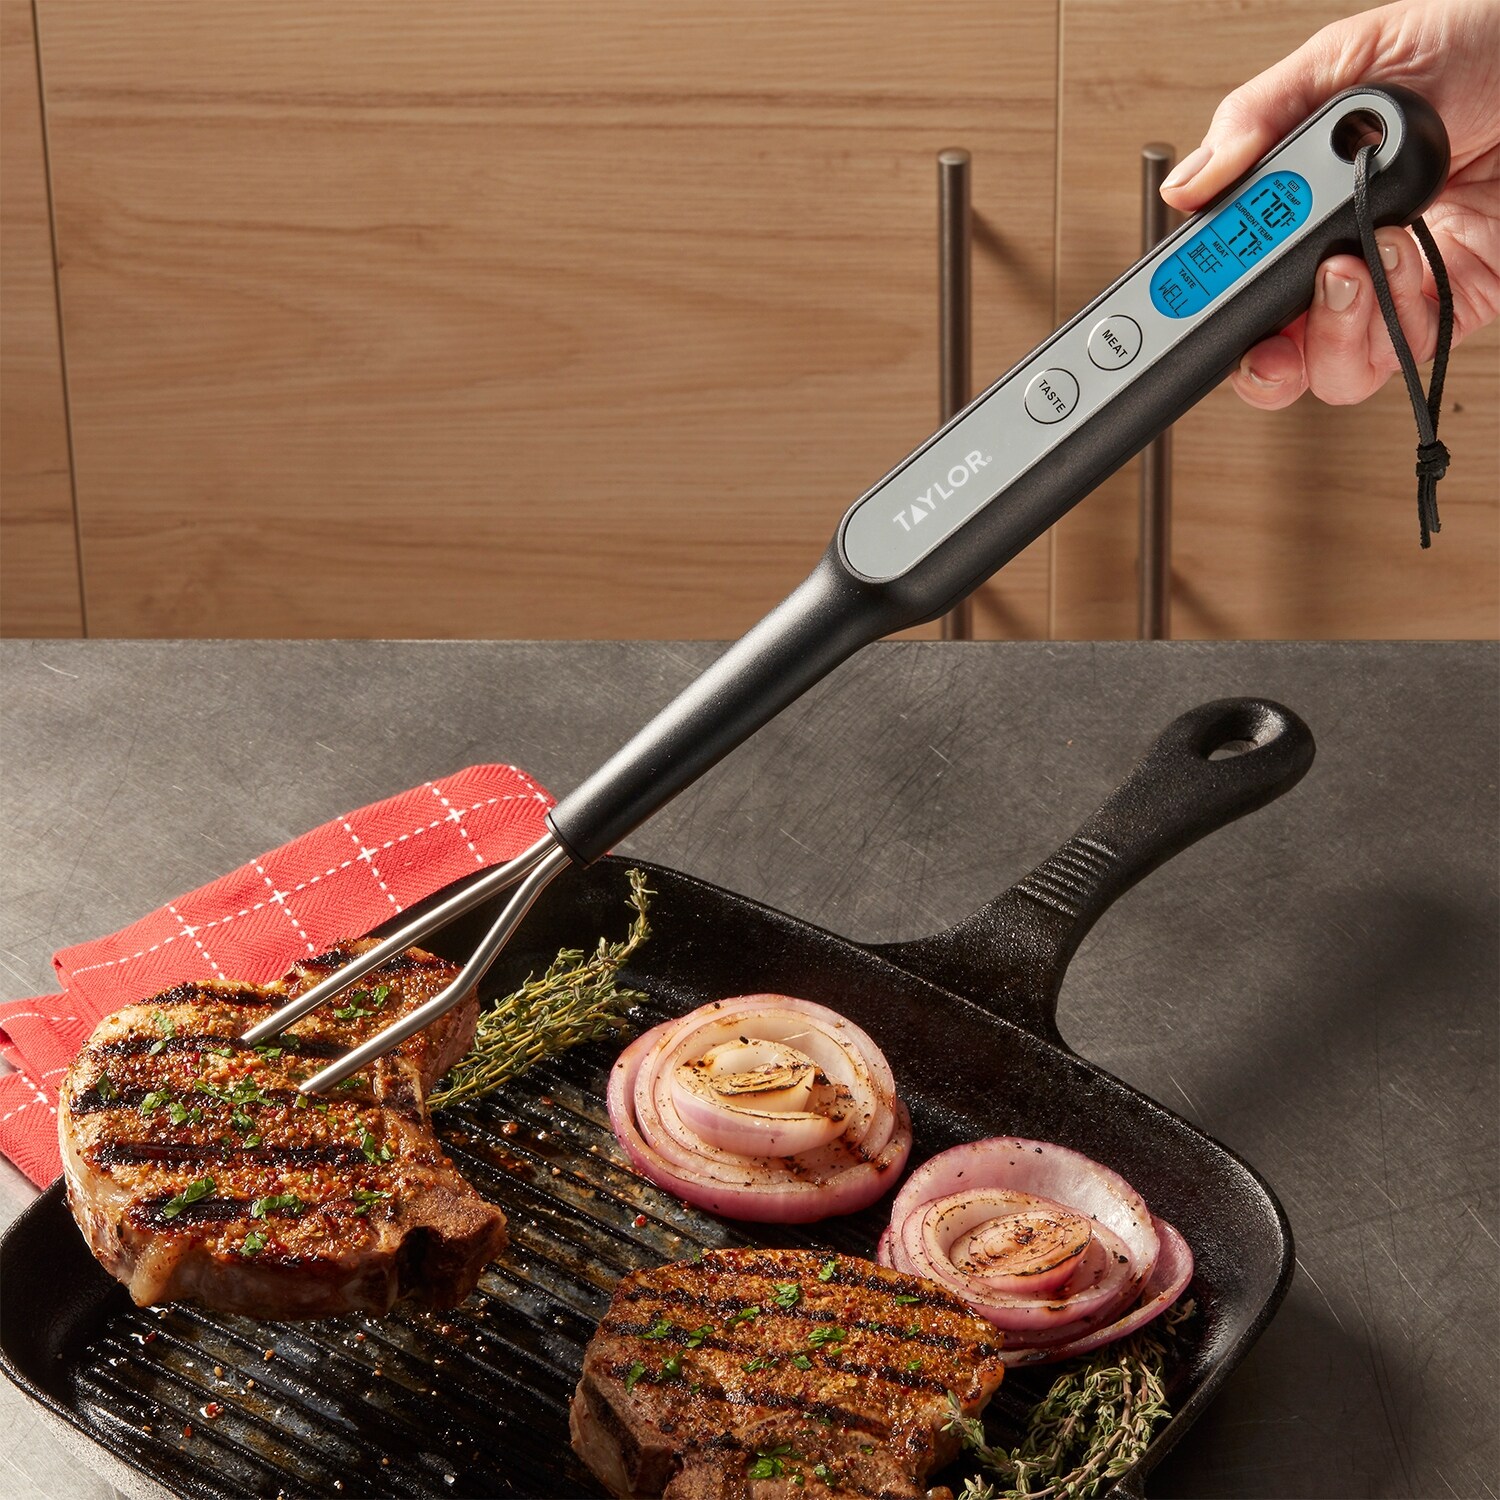 Crate & Barrel by Taylor Barbecue Thermometer Fork + Reviews